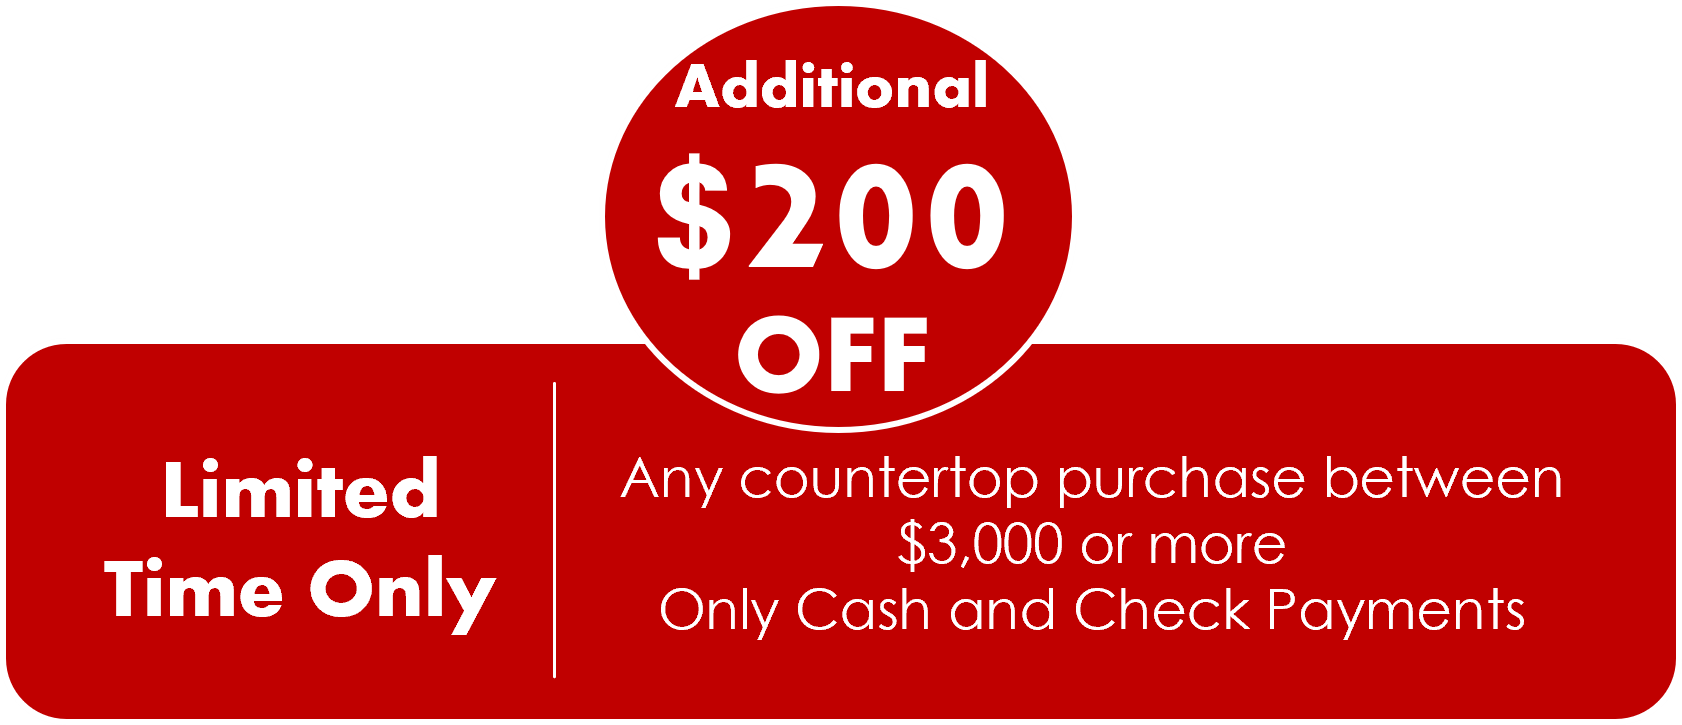 a red sign that says additional $ 200 off any countertop purchase between $ 3,000 or more only cash and check payments